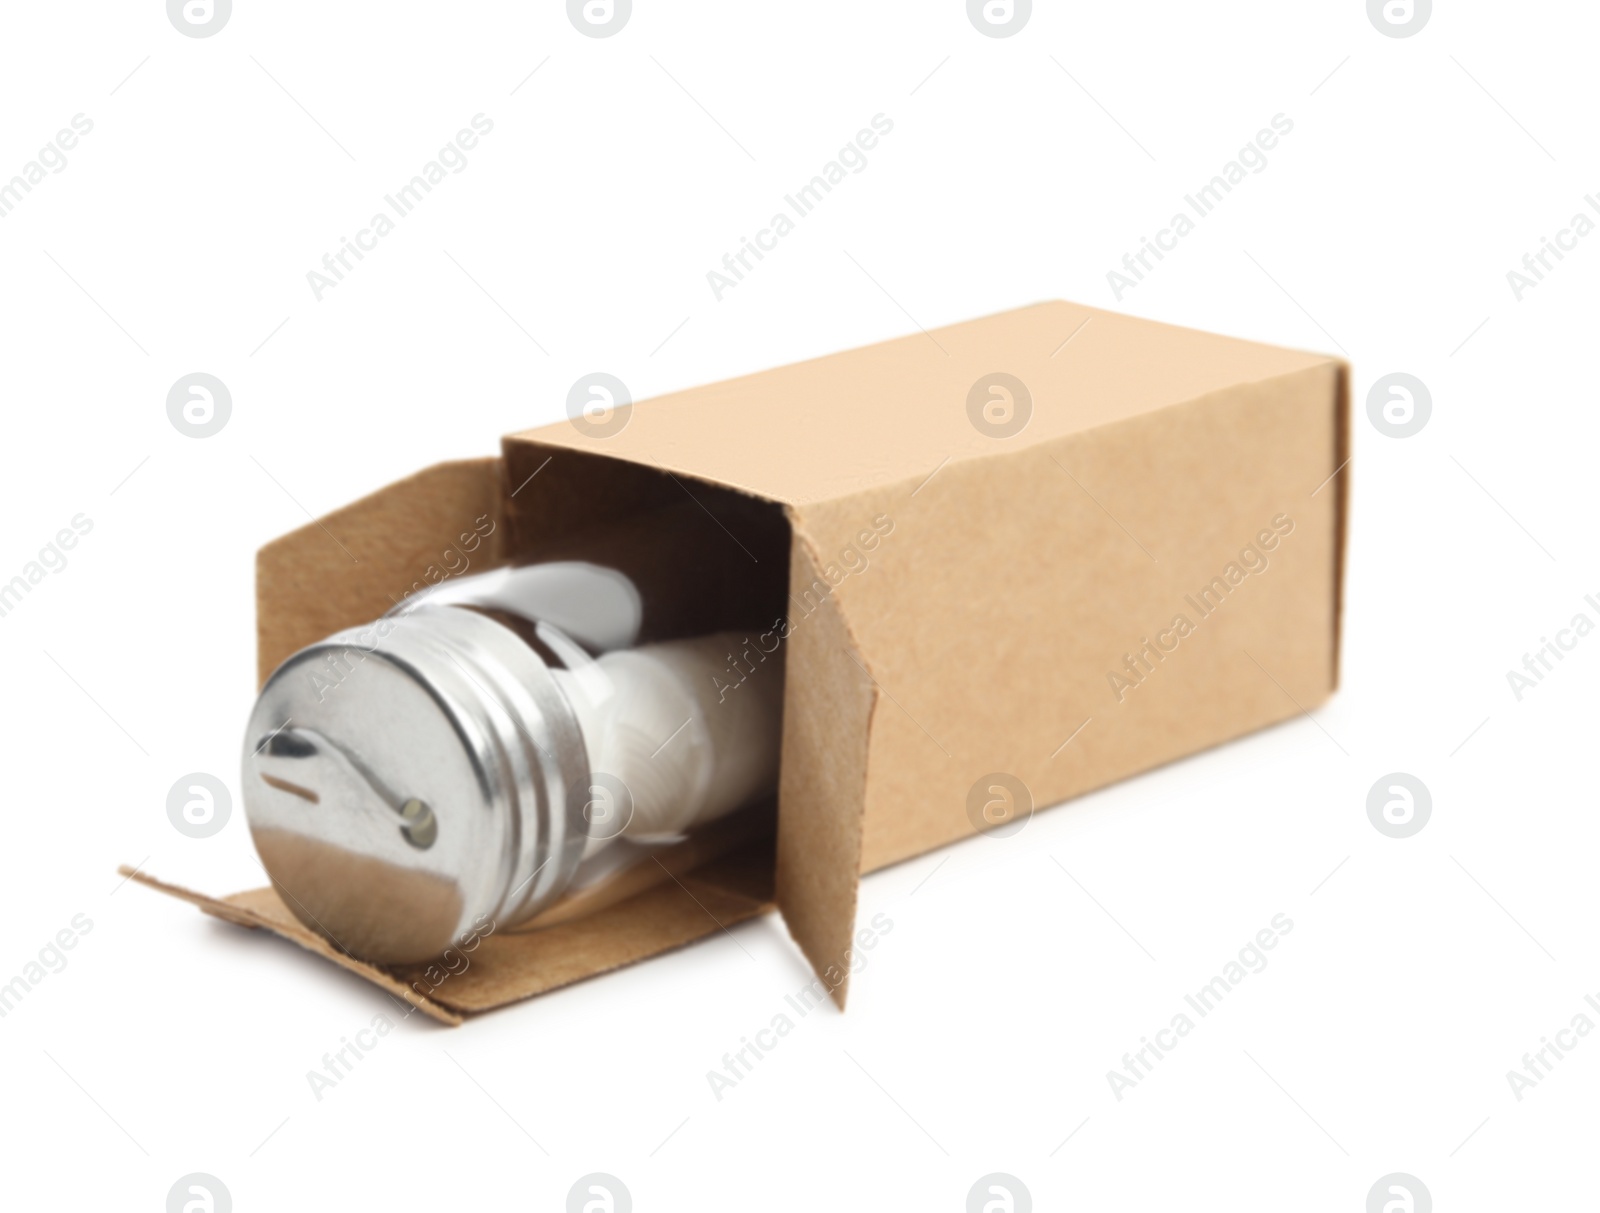 Photo of Jar with roll of natural dental floss in box on white background